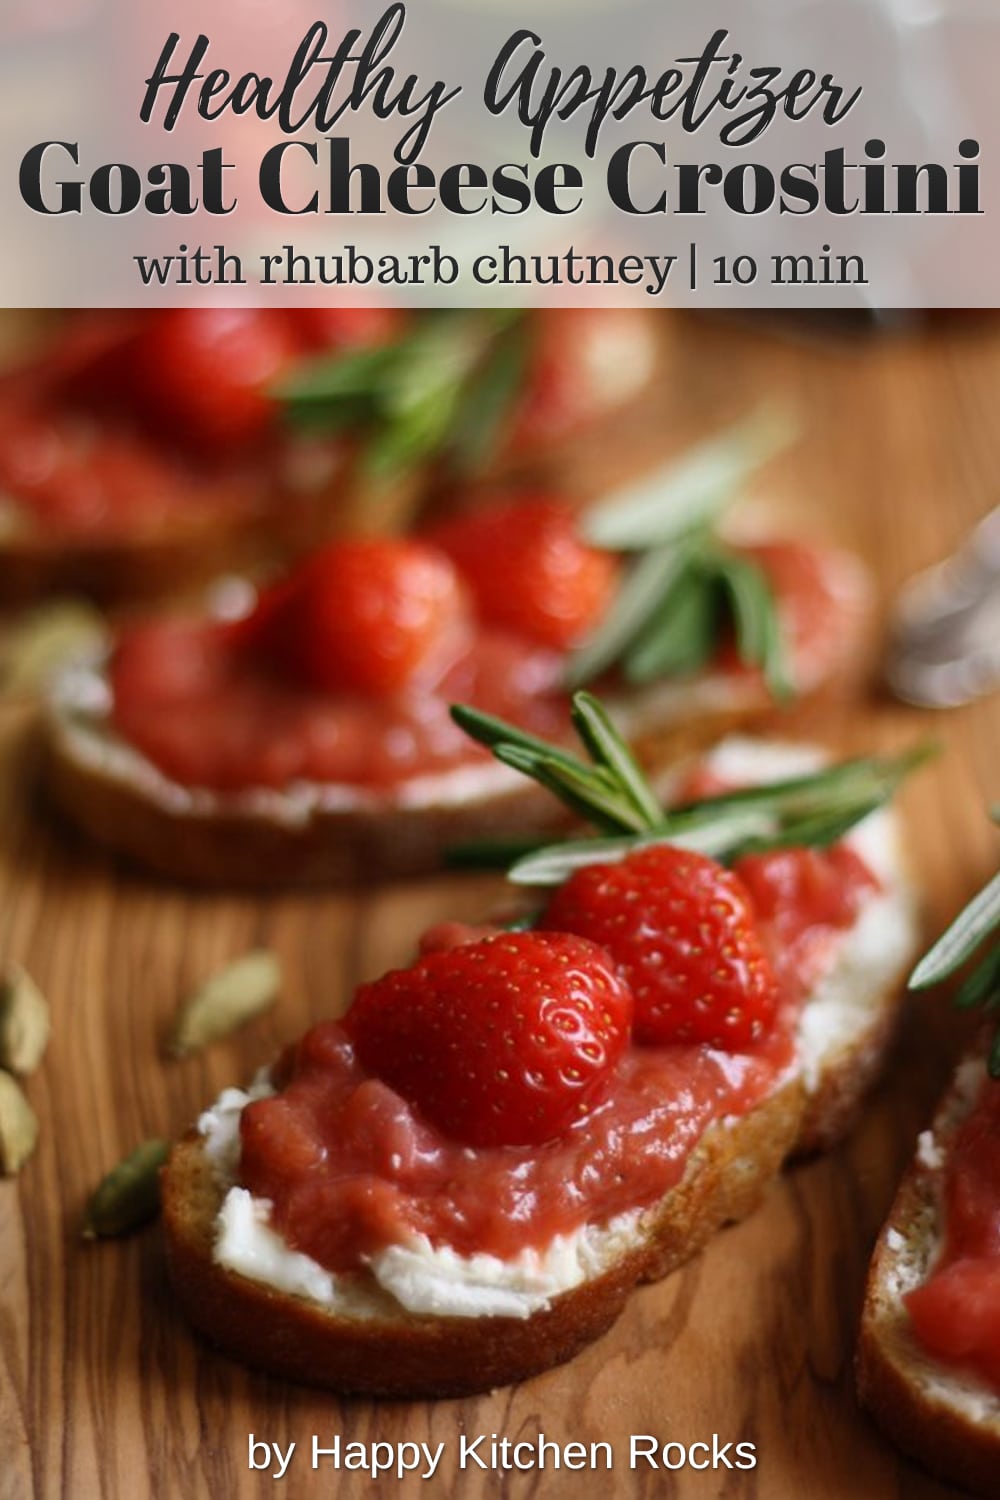 Goat Cheese Crostini with Rhubarb Chutney Closeup Collage with Text Overlay